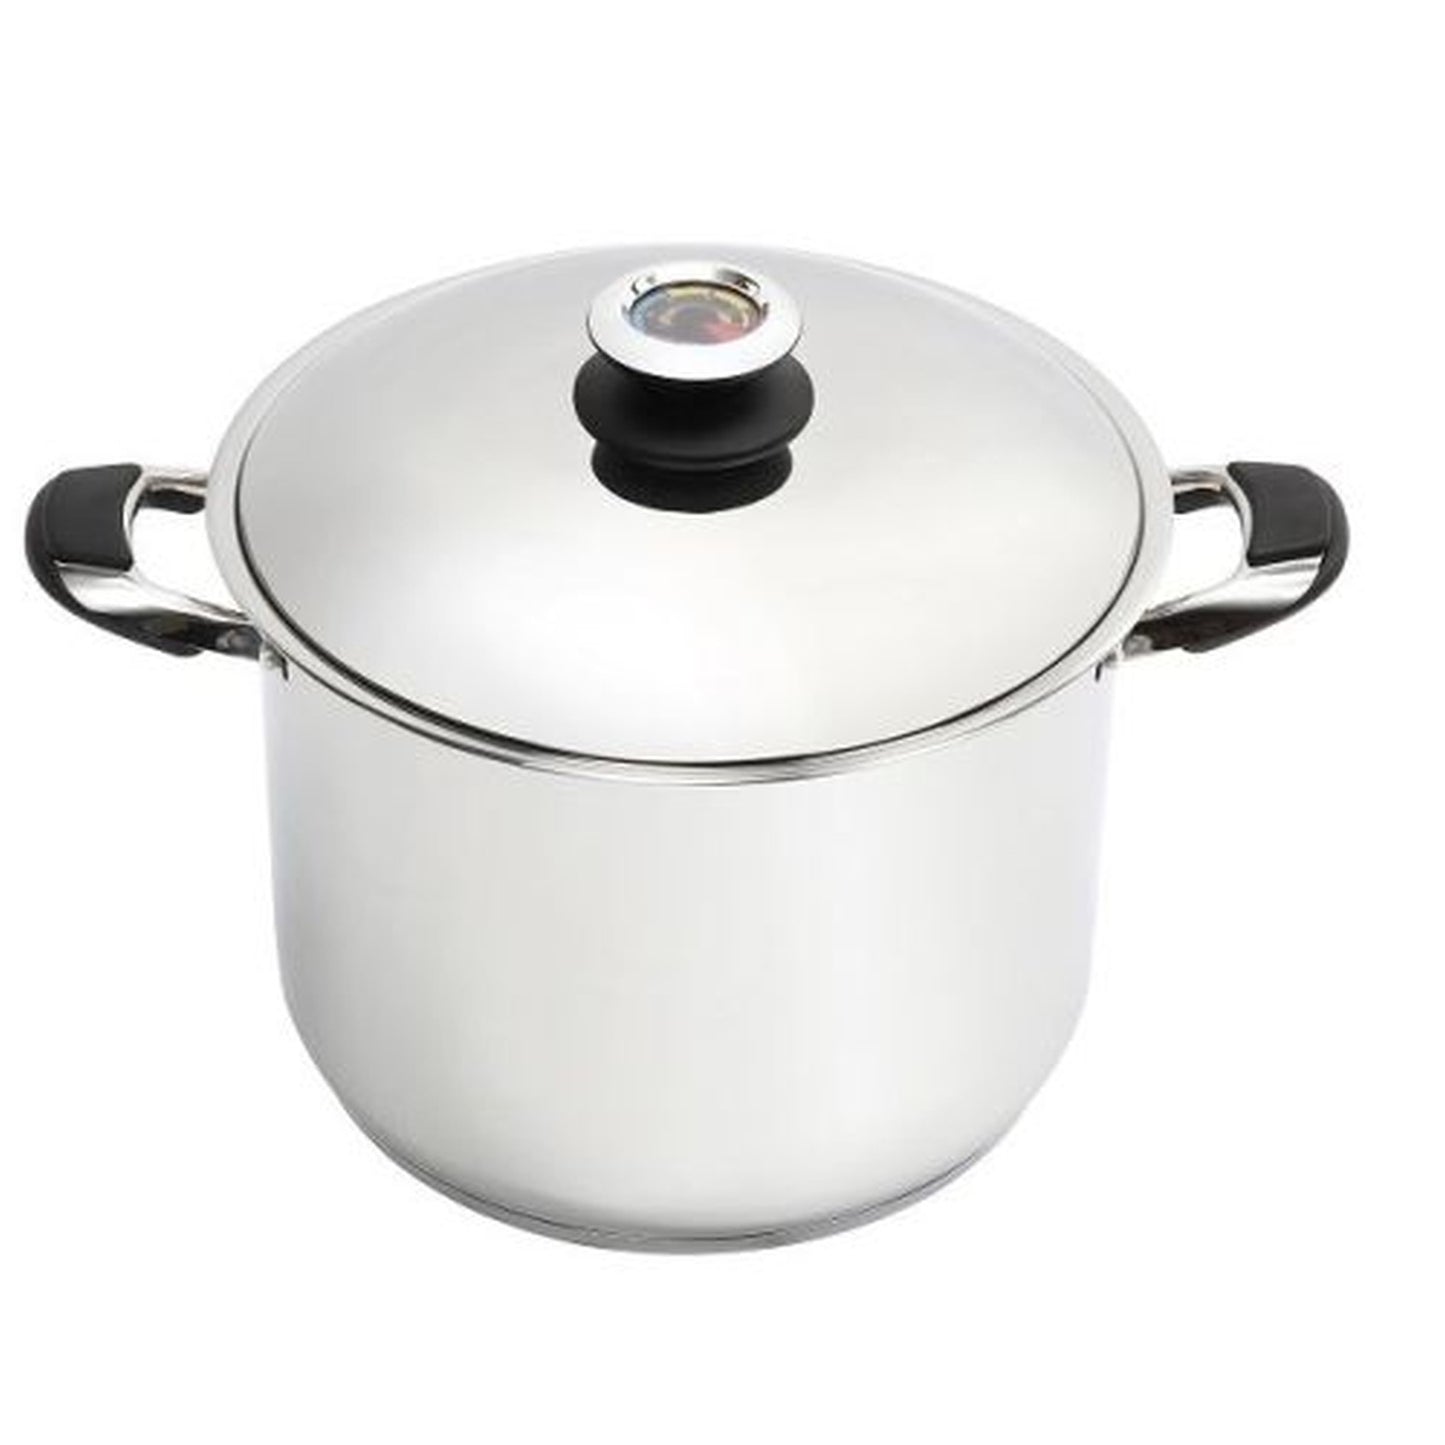 Lorenzo Stainless Steel 20 Qt Stock Pot Design By Valenti, Stainless Steel